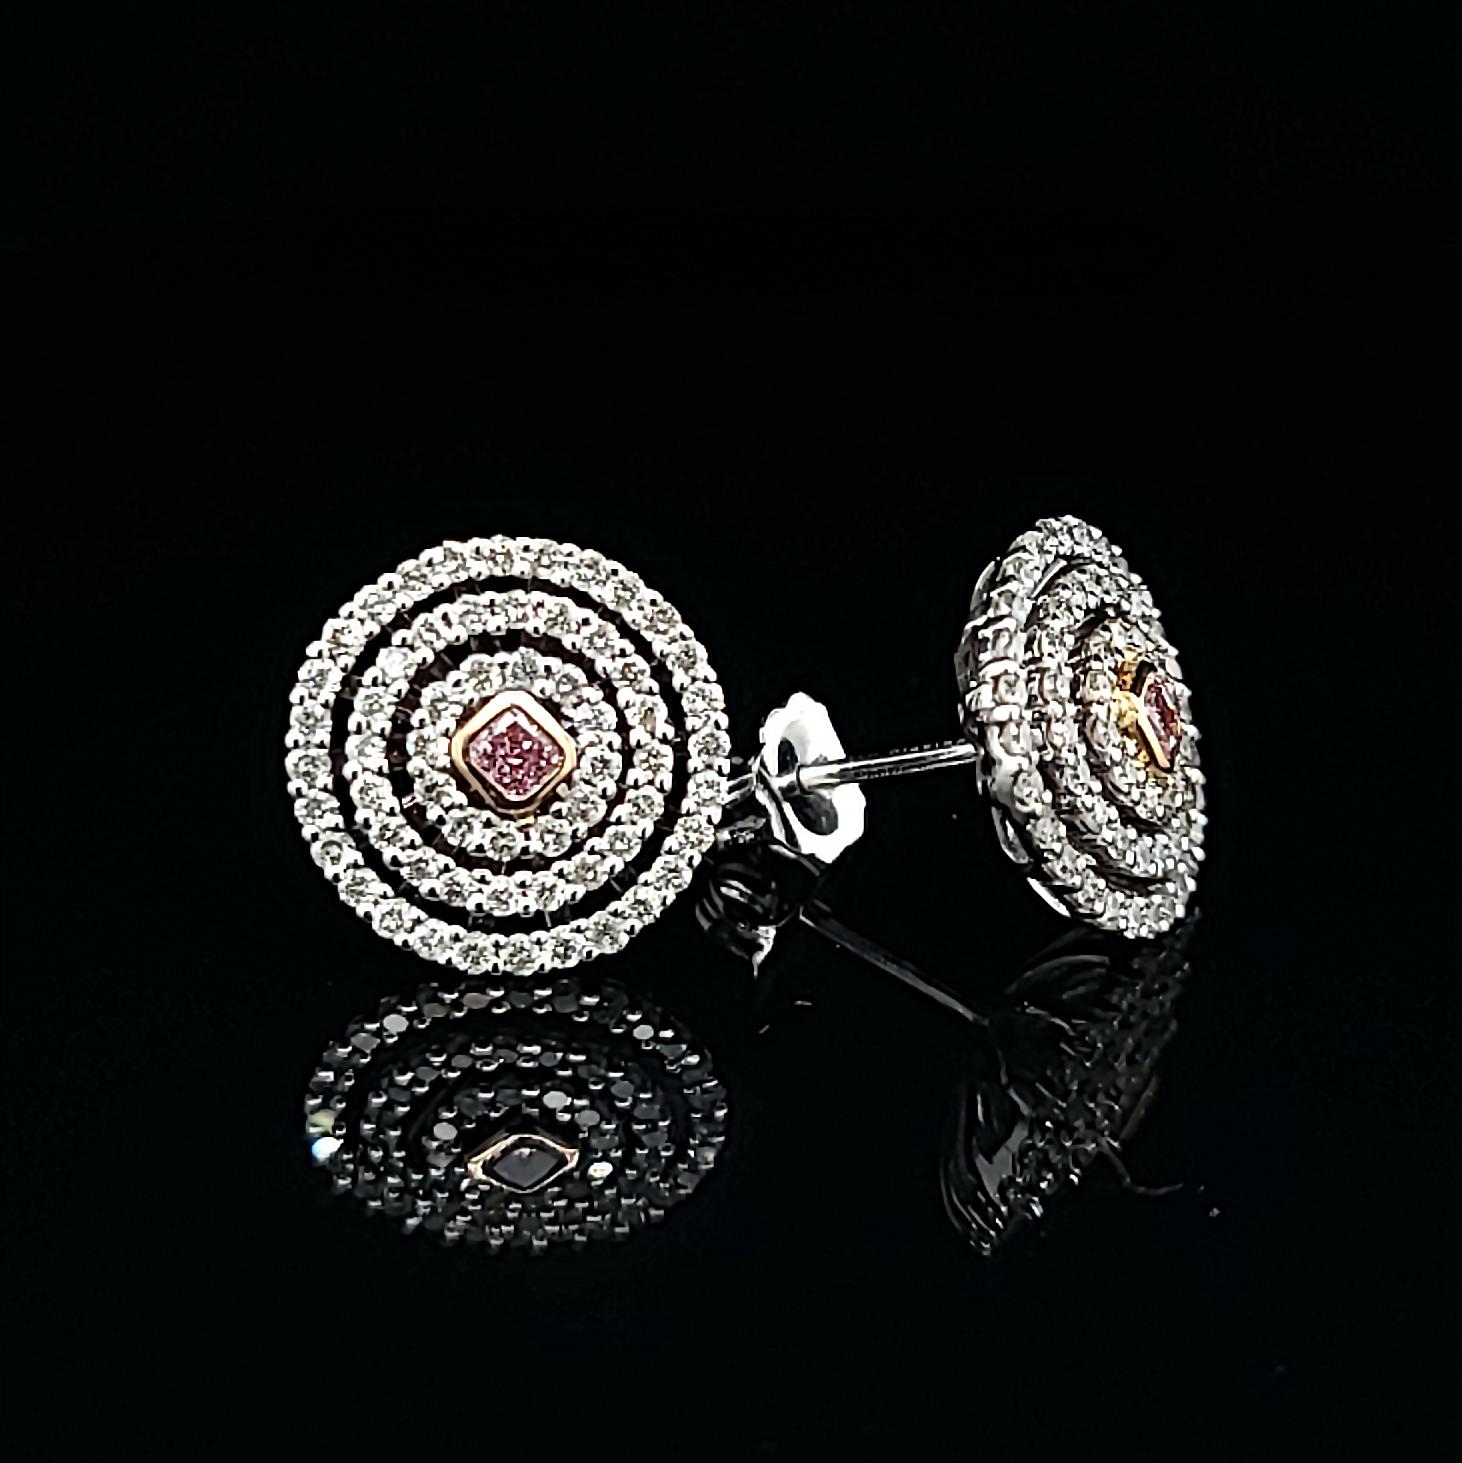 Pink Diamond 18k White Gold Rose Gold Stud Earrings by Kristin Hanson. Bath in the elegance of Pink Diamond Water Ring stud earrings. With natural pink diamond center stones set in 18k rose gold and surrounded by triple halo pave' diamonds. A